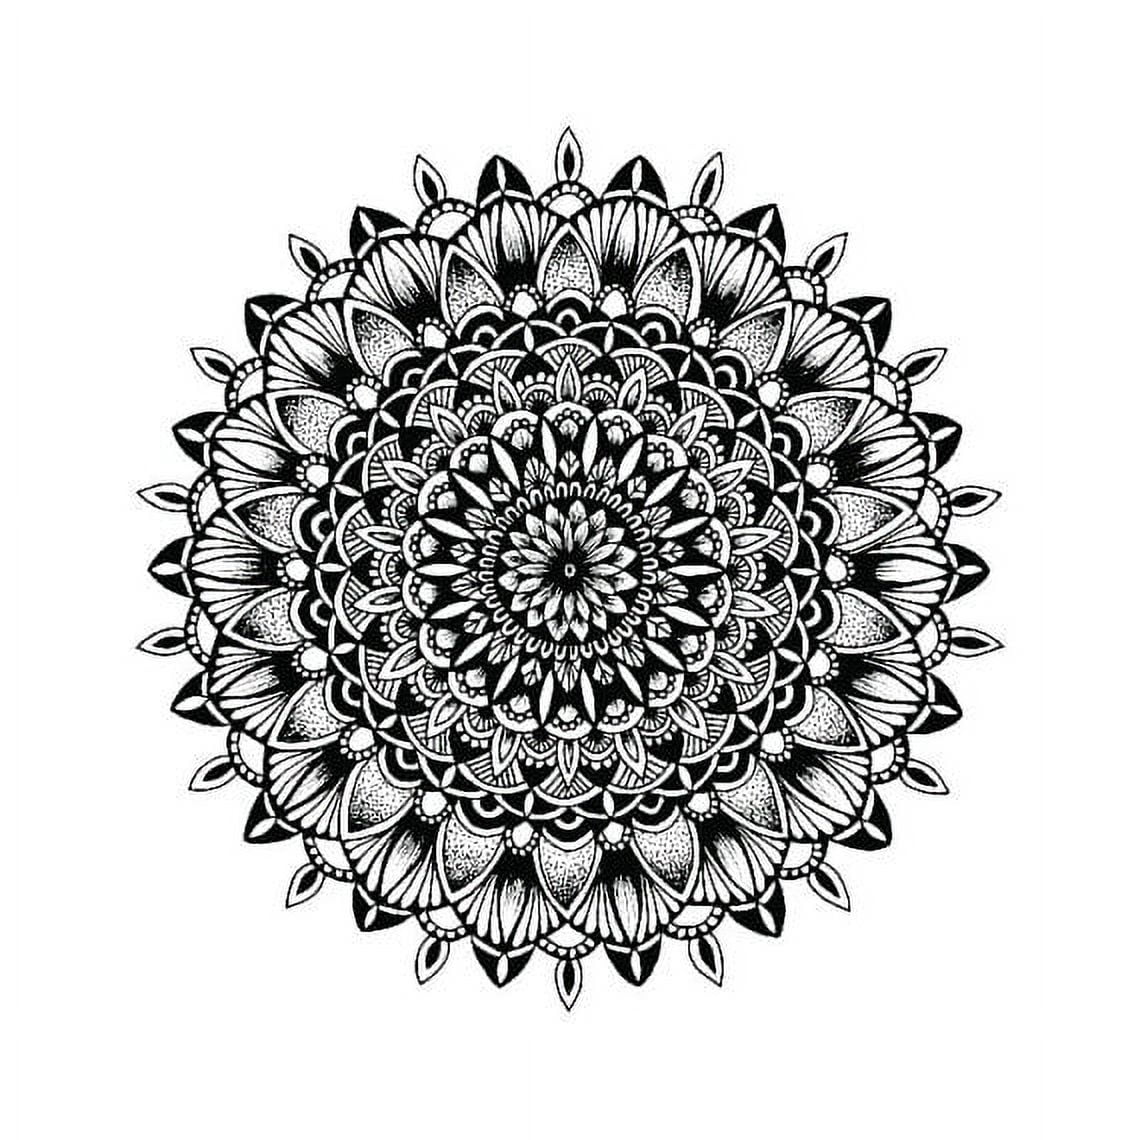 Get This Beautiful and Sensual Flower and Mandala Tattoo Design. - Etsy